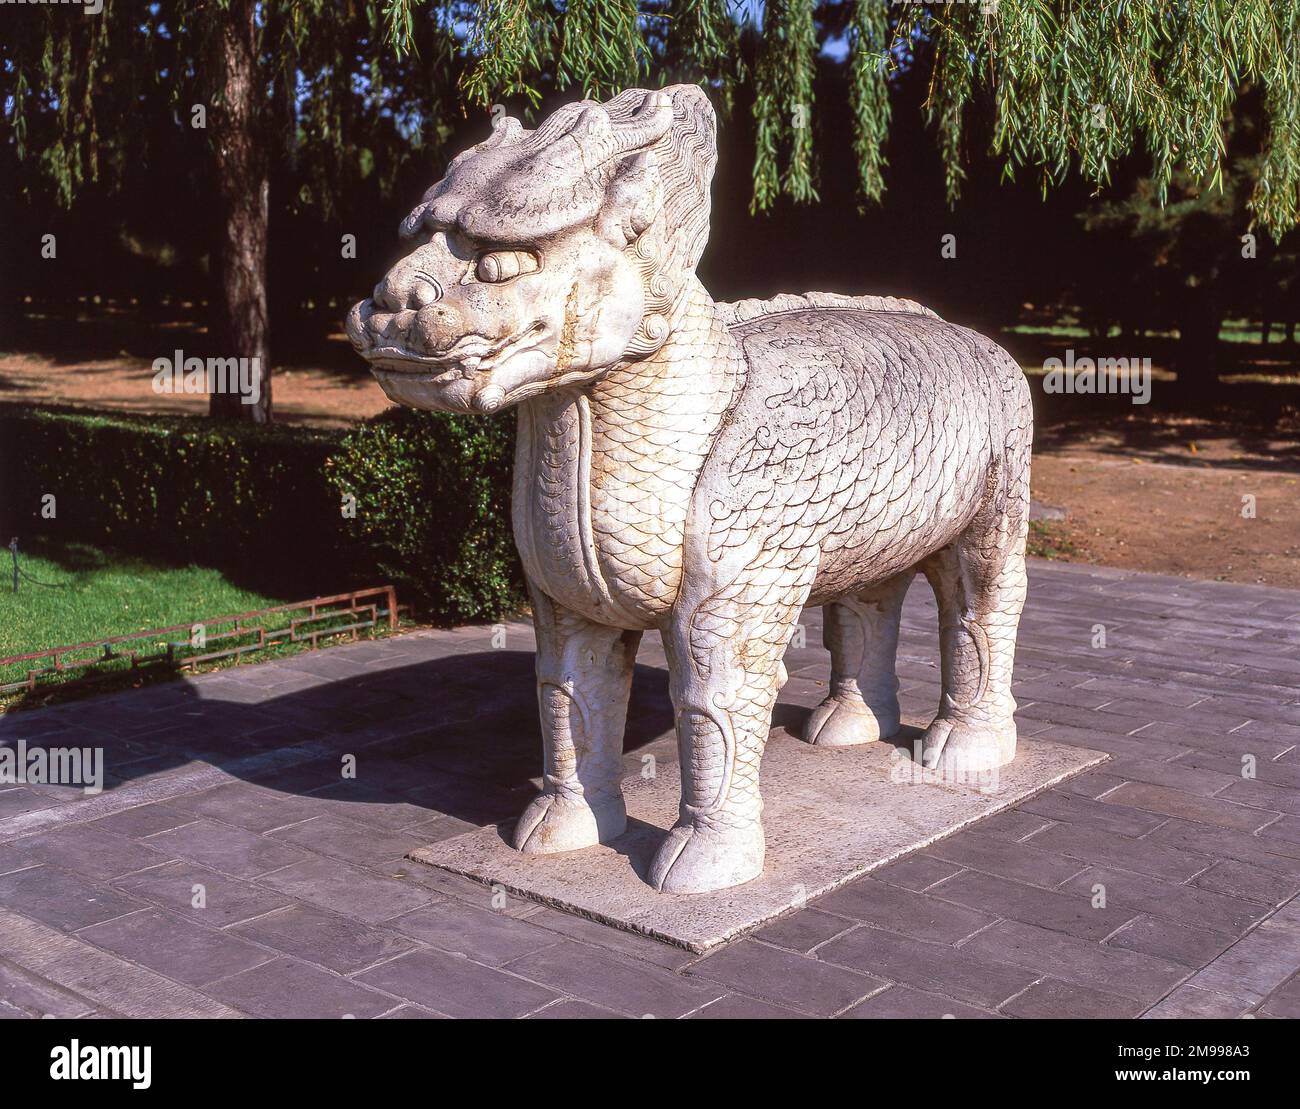 Xiezhi mythical ancient creature statue, Sacred Way, The Ming tombs, Changping District, Beijing, The People's Republic of China Stock Photo